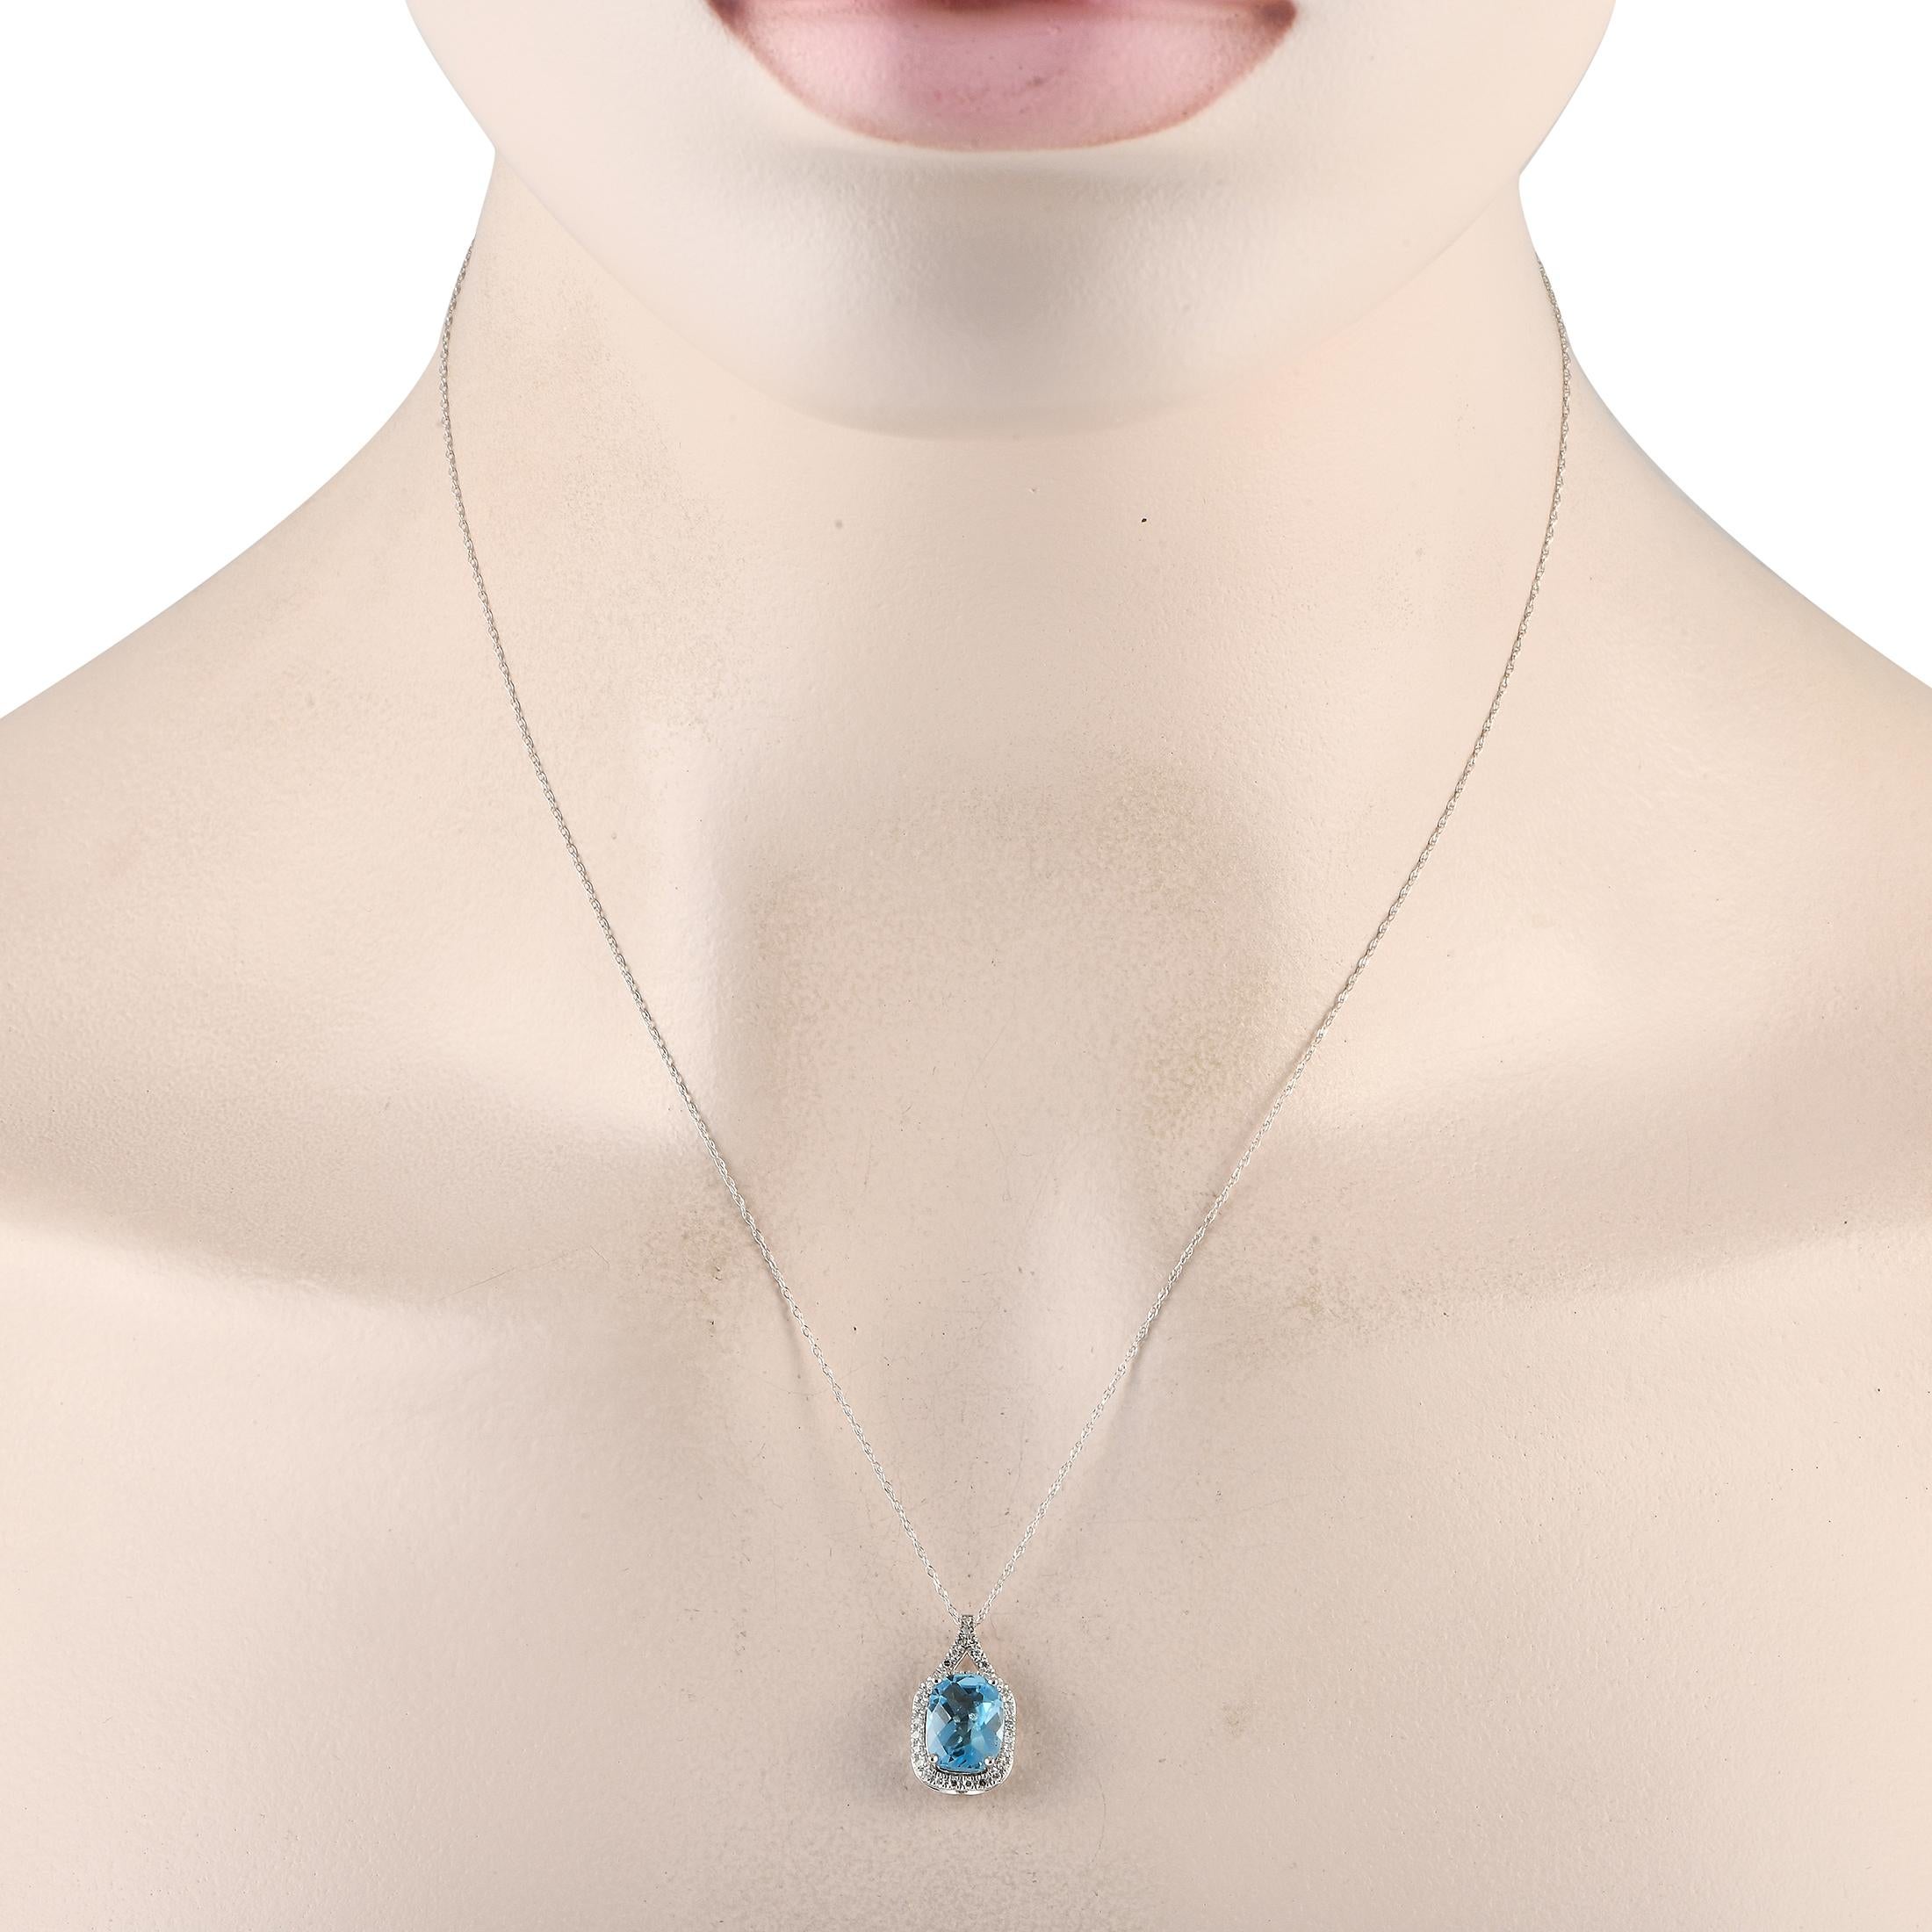 A brilliant blue Blue Topaz gemstone makes a statement on this impeccably crafted luxury necklace. This pieces pendant is crafted from 14K White Gold and measures 0.75 long by 0.45 wide. Its suspended from an 18 chain and includes sparkling Diamond